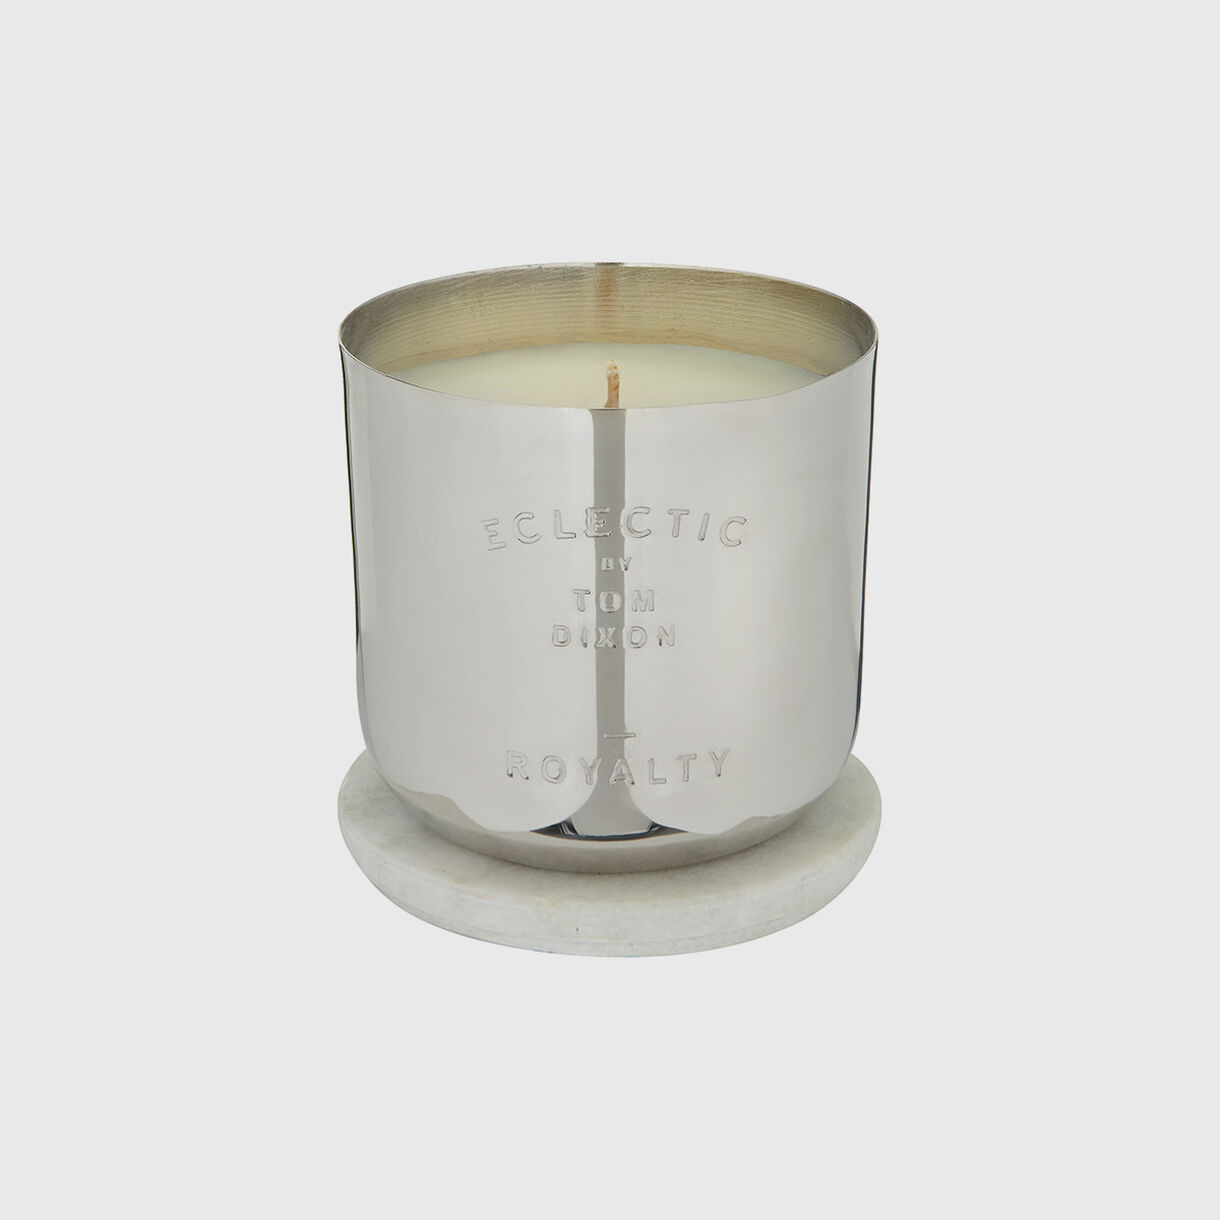 Eclectic Royalty Candle, Medium